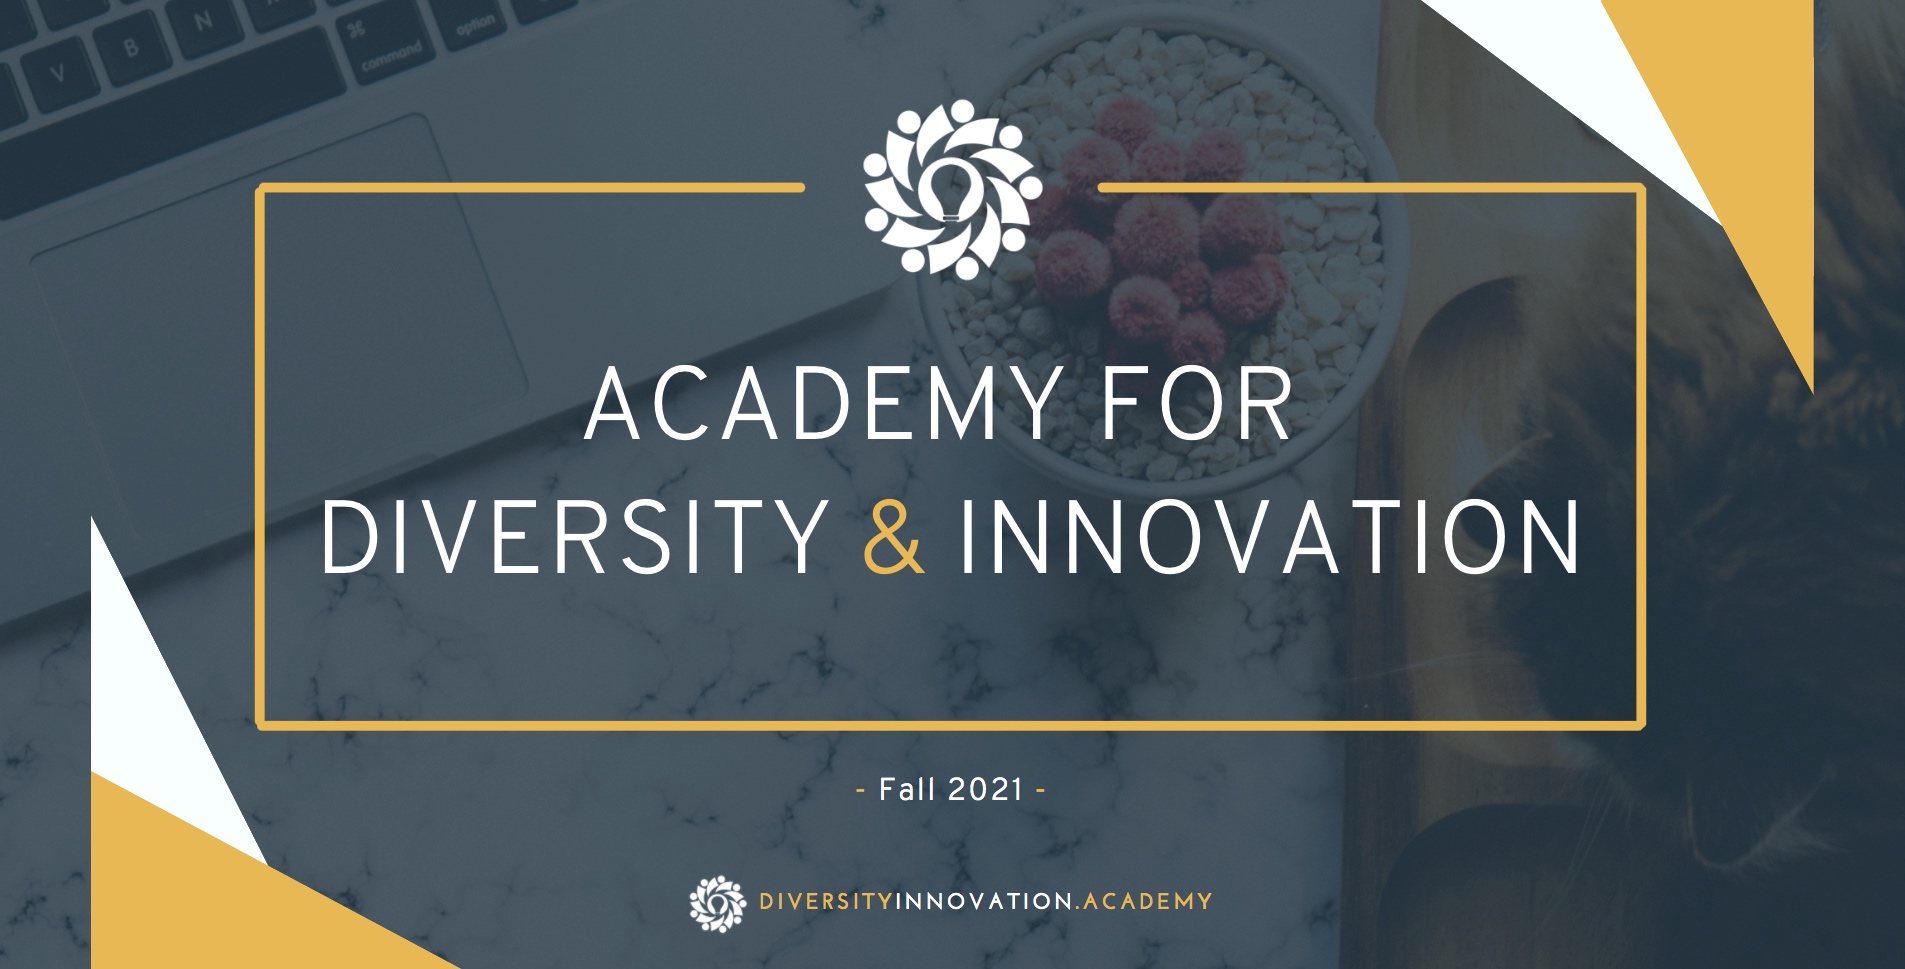 Academy for Diversity & Innovation - Fall 2021